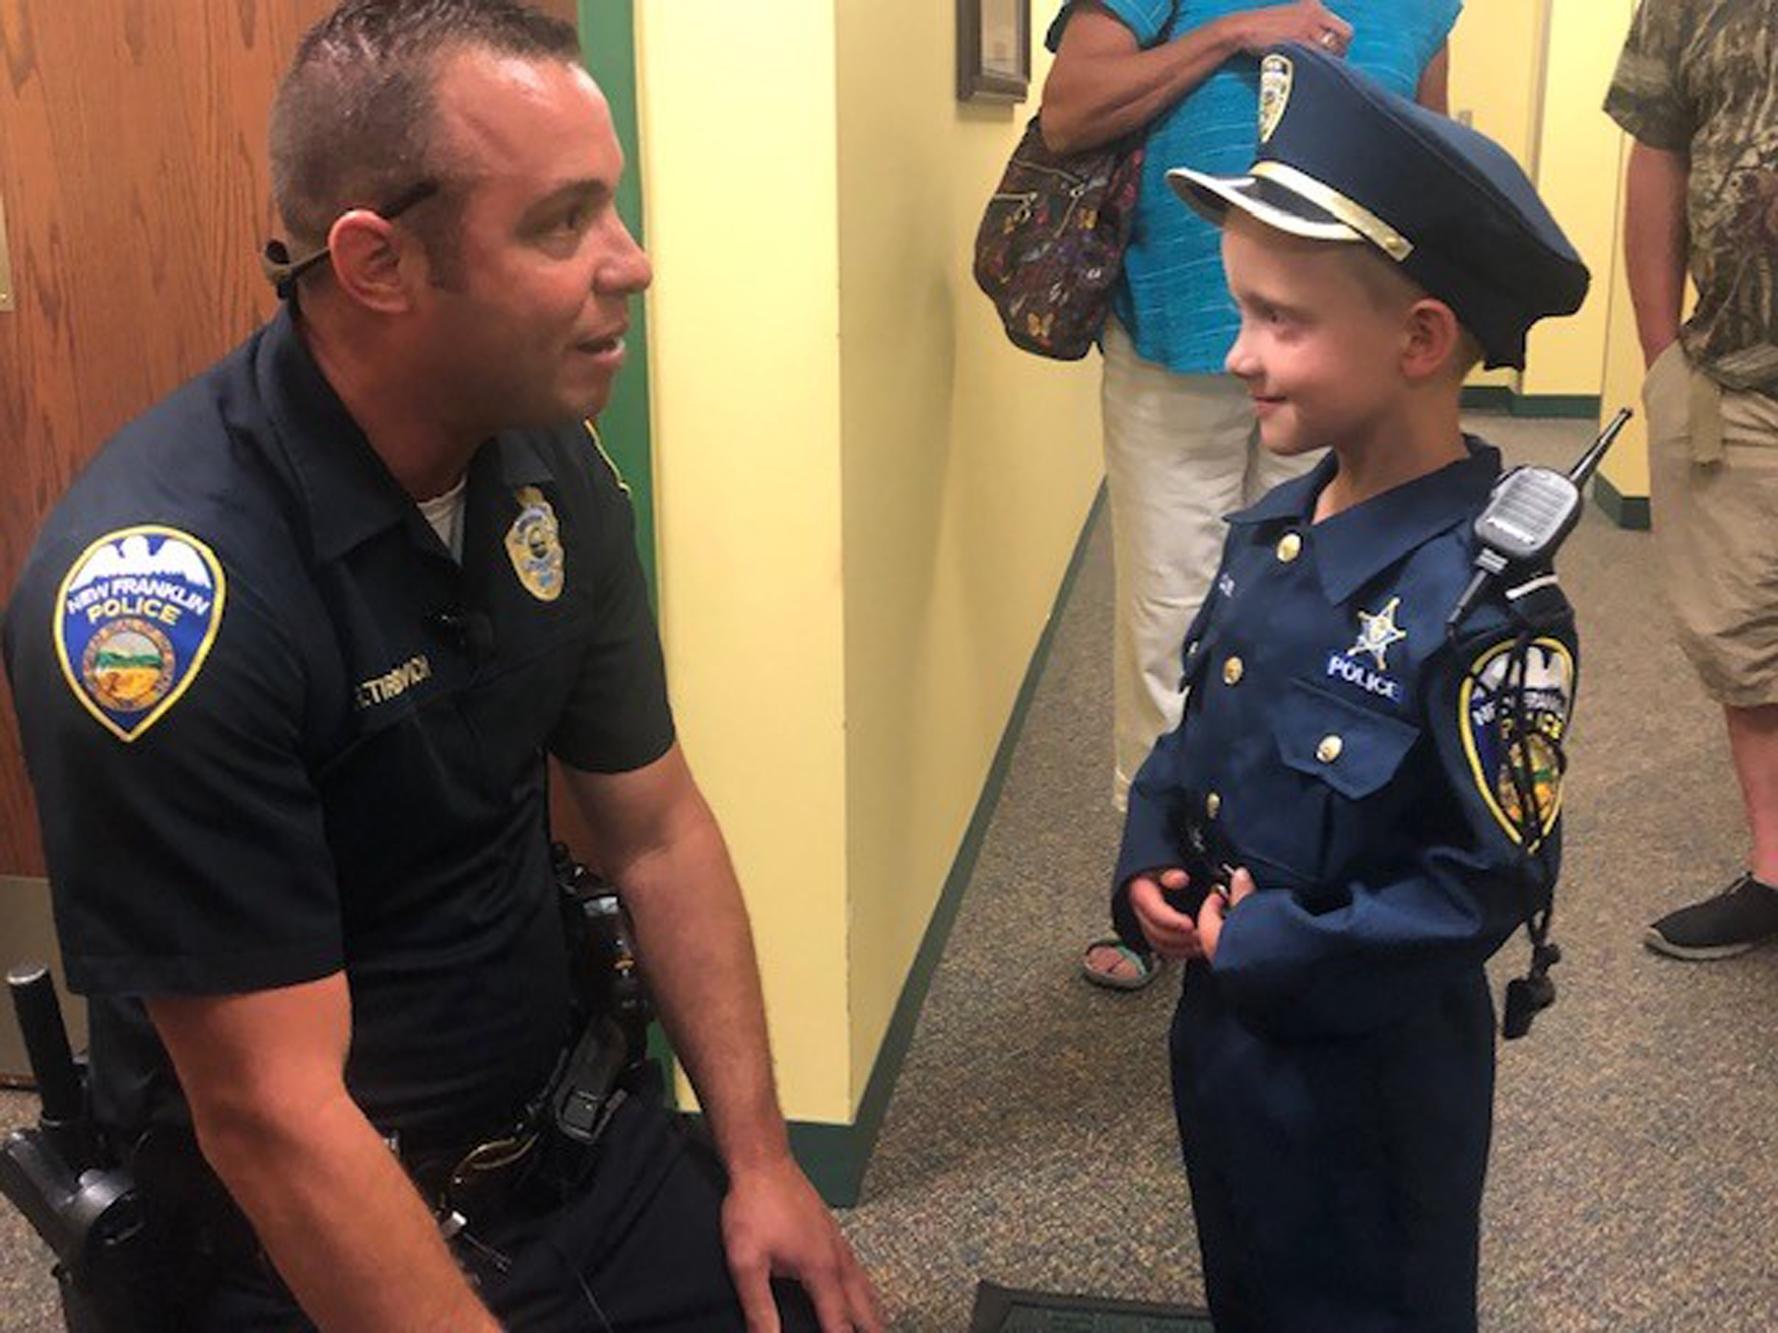 New Franklin boy becomes police officer for a day